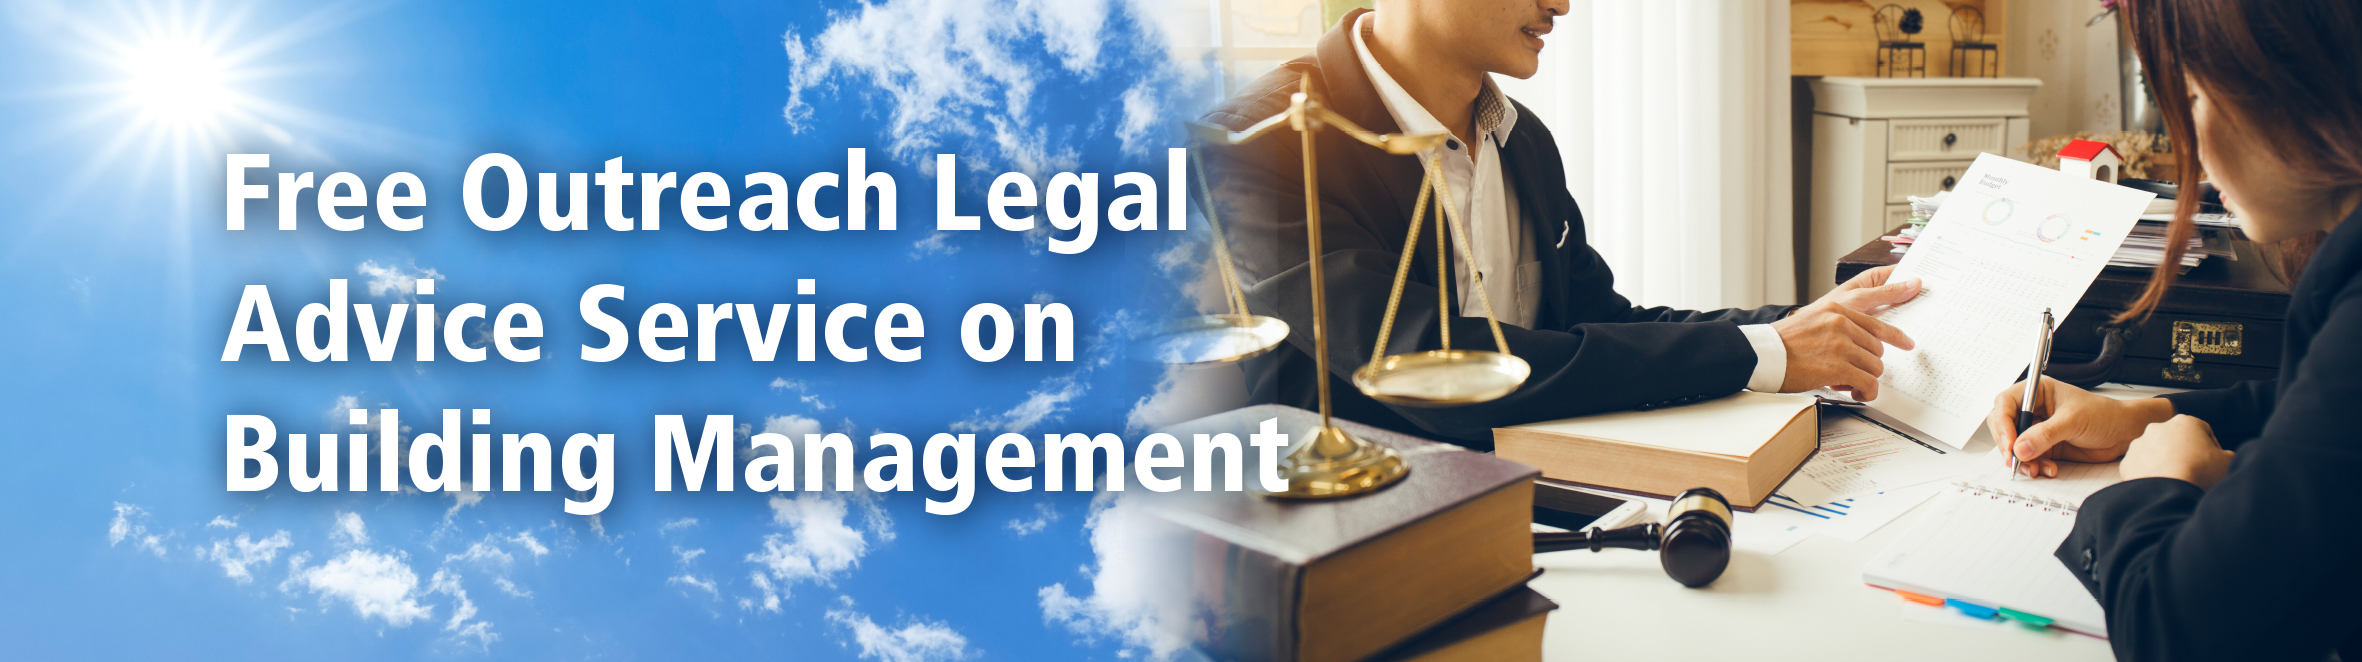 Free Outreach Legal Advice Service on Building Management